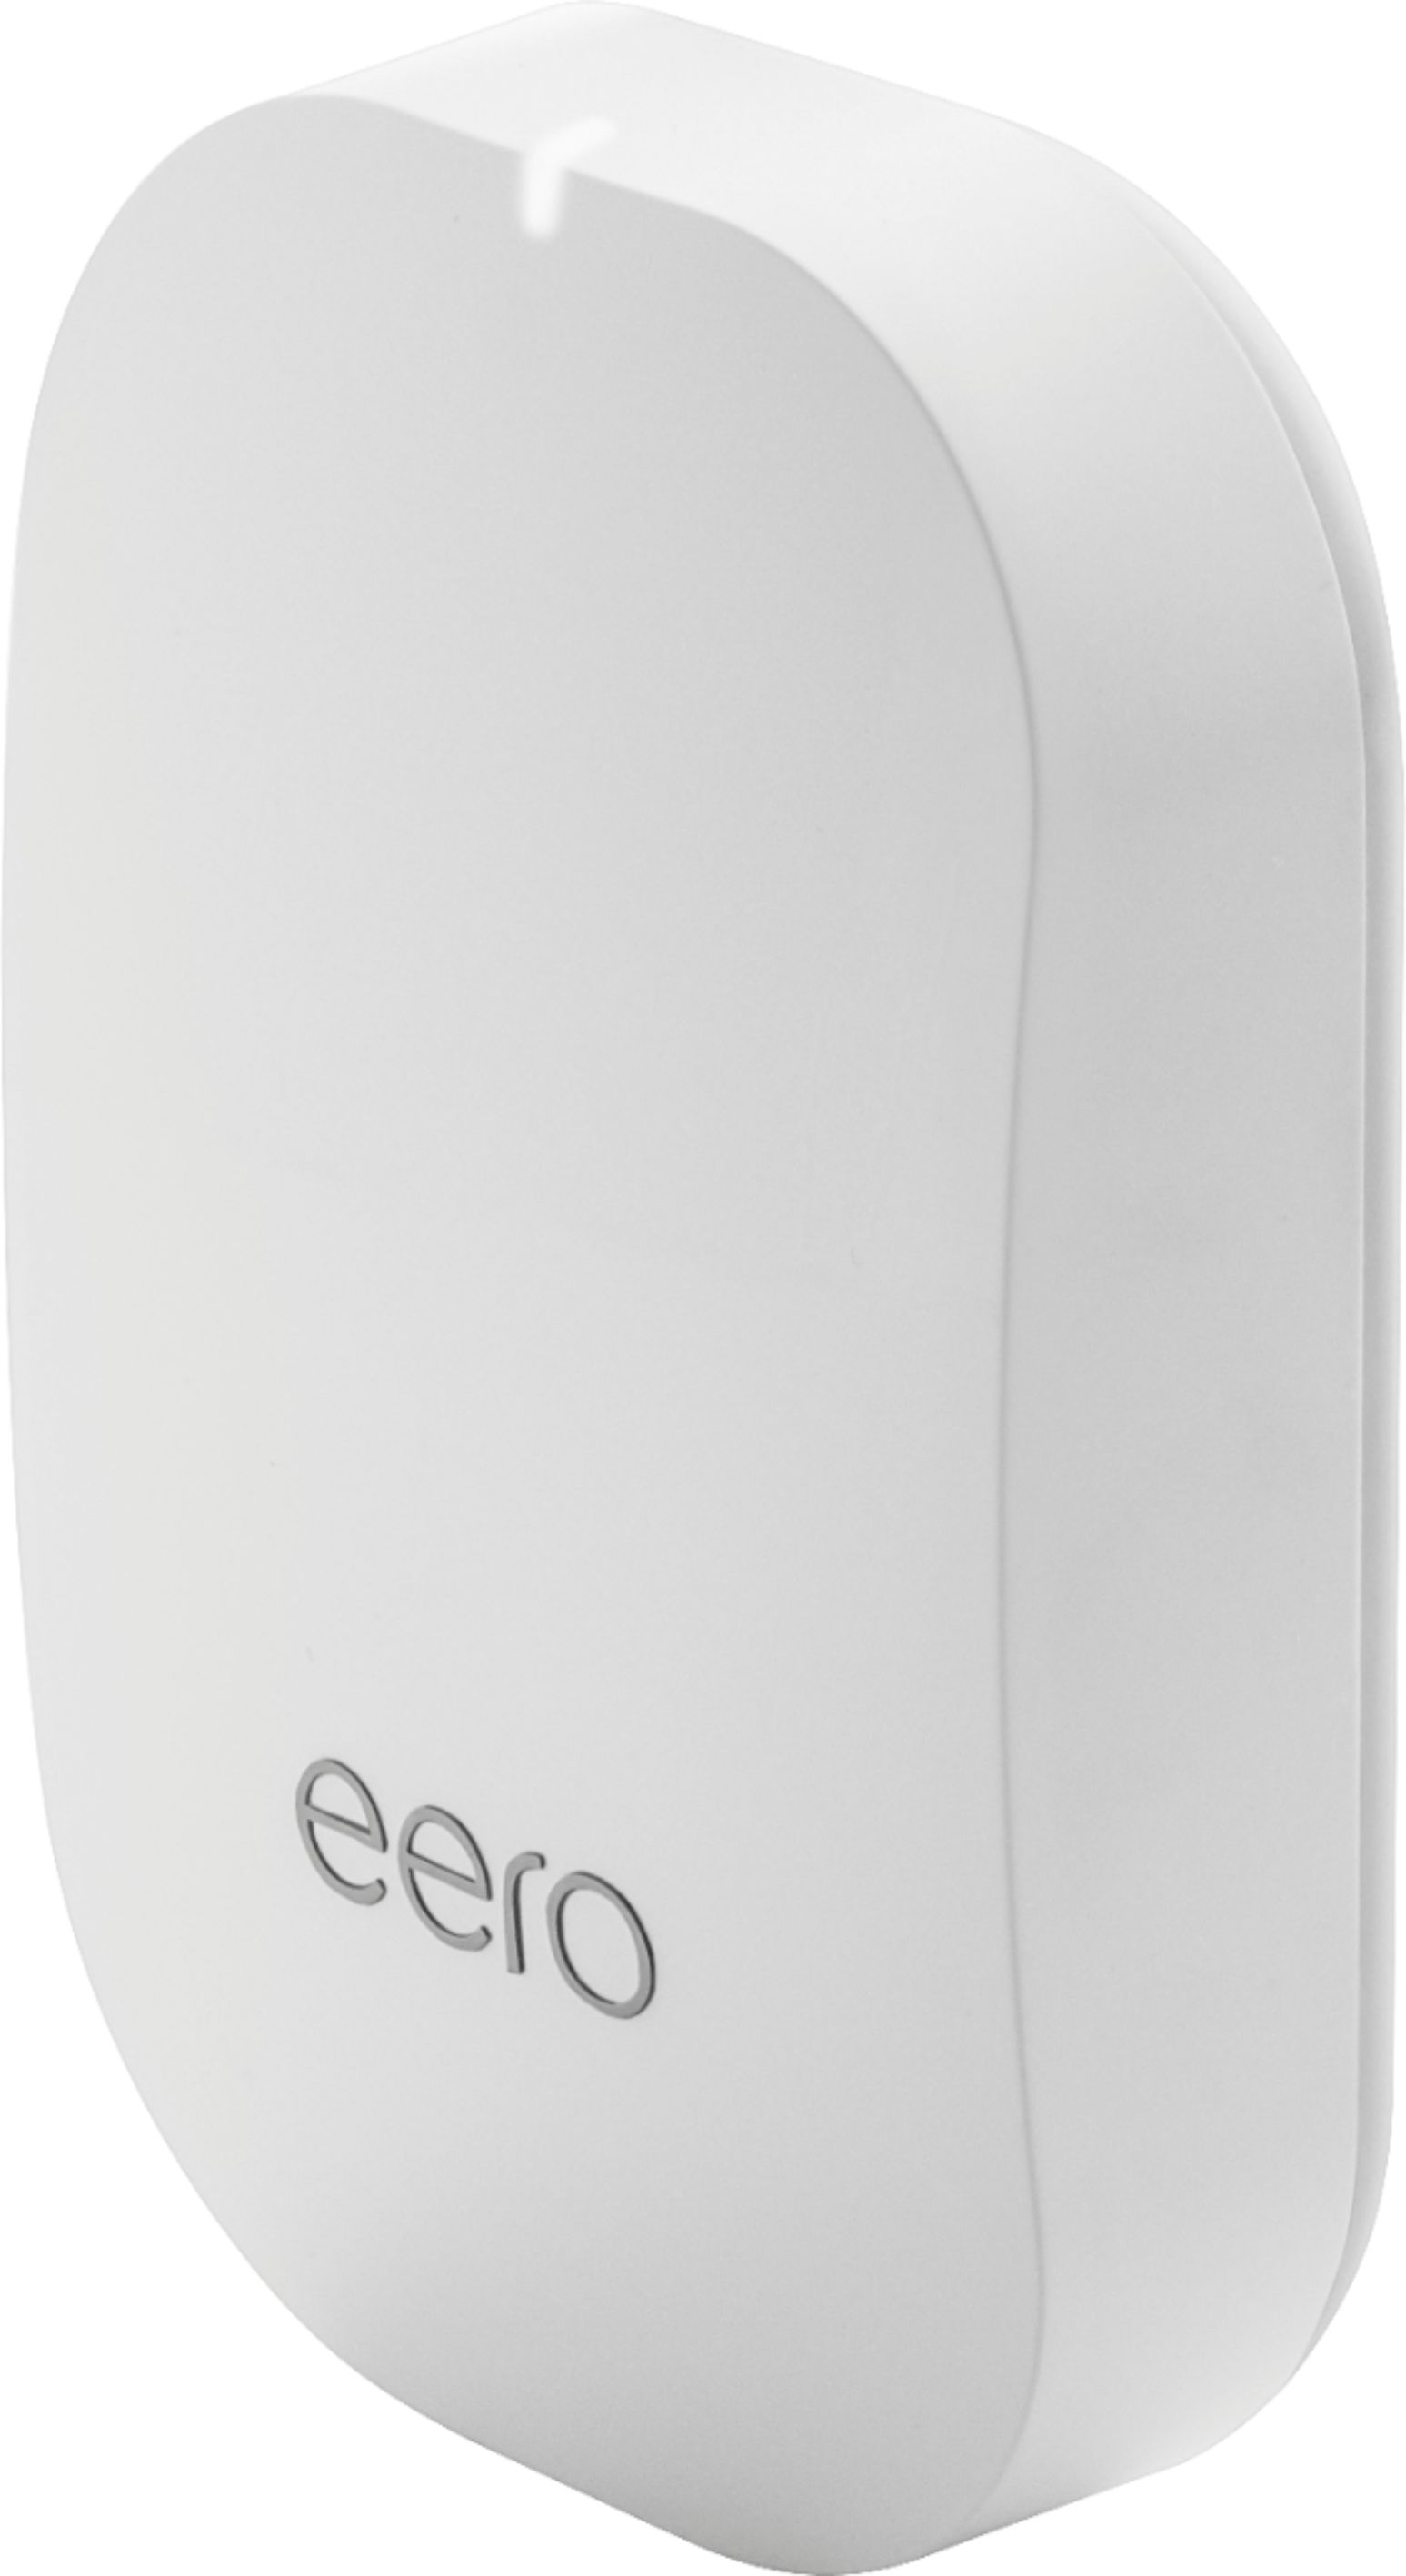 Left View: eero Home WiFi System (1 eero + 2 eero Beacon) ? 2nd Generation ? Advanced Tri-Band Mesh WiFi System to Replace Traditional Routers and WiFi Ranger Extenders ? Coverage: 2 to 4 Bedroom Home